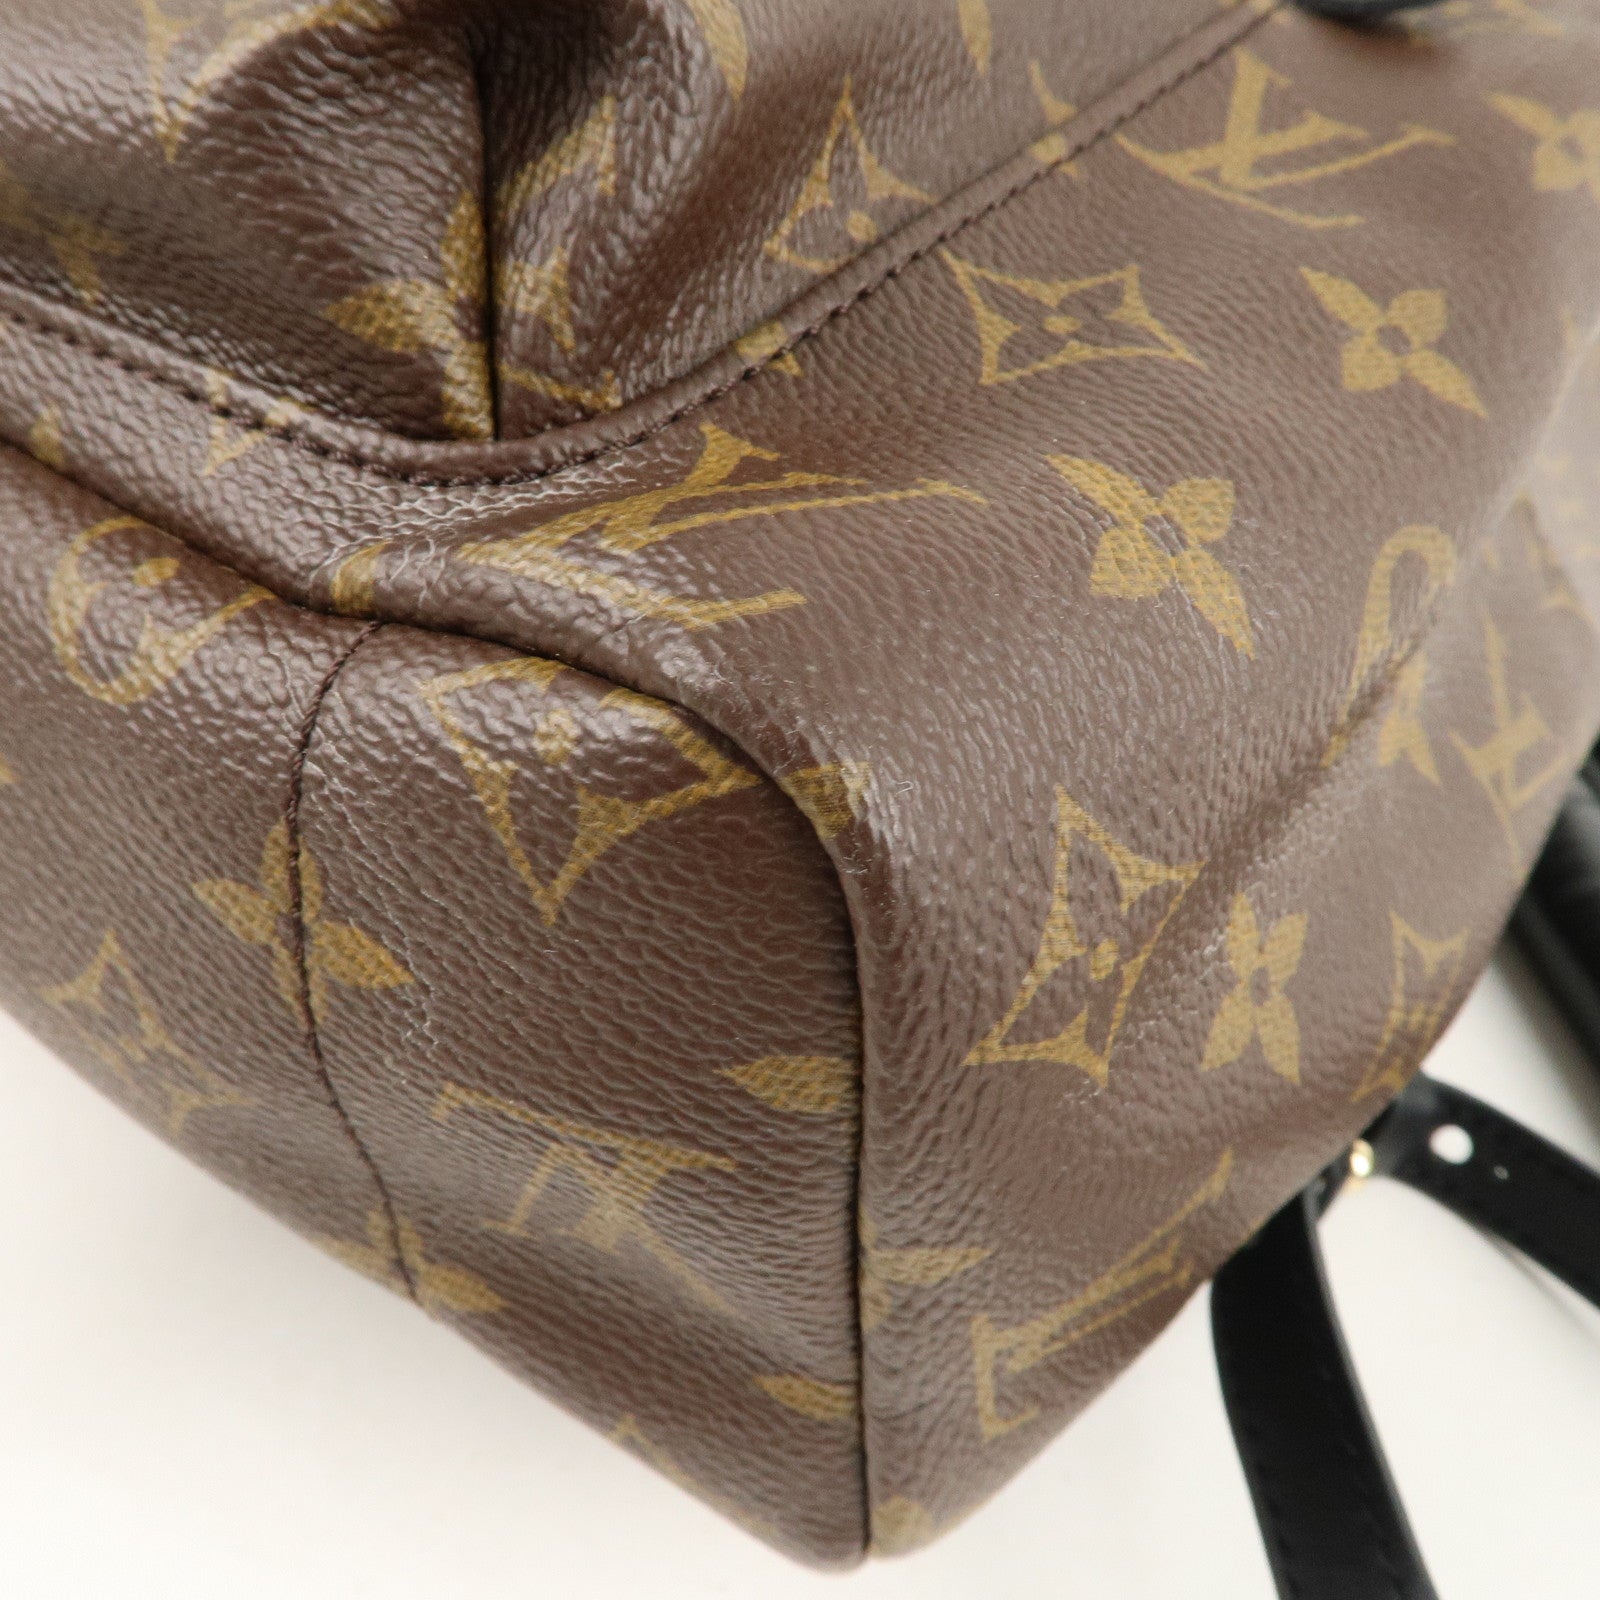 Authentic Louis Vuitton Monogram Canvas Palm Springs Backpack MM Handbag  Article: M41561 Made in France, Accessorising - Brand Name / Designer  Handbags For Car…